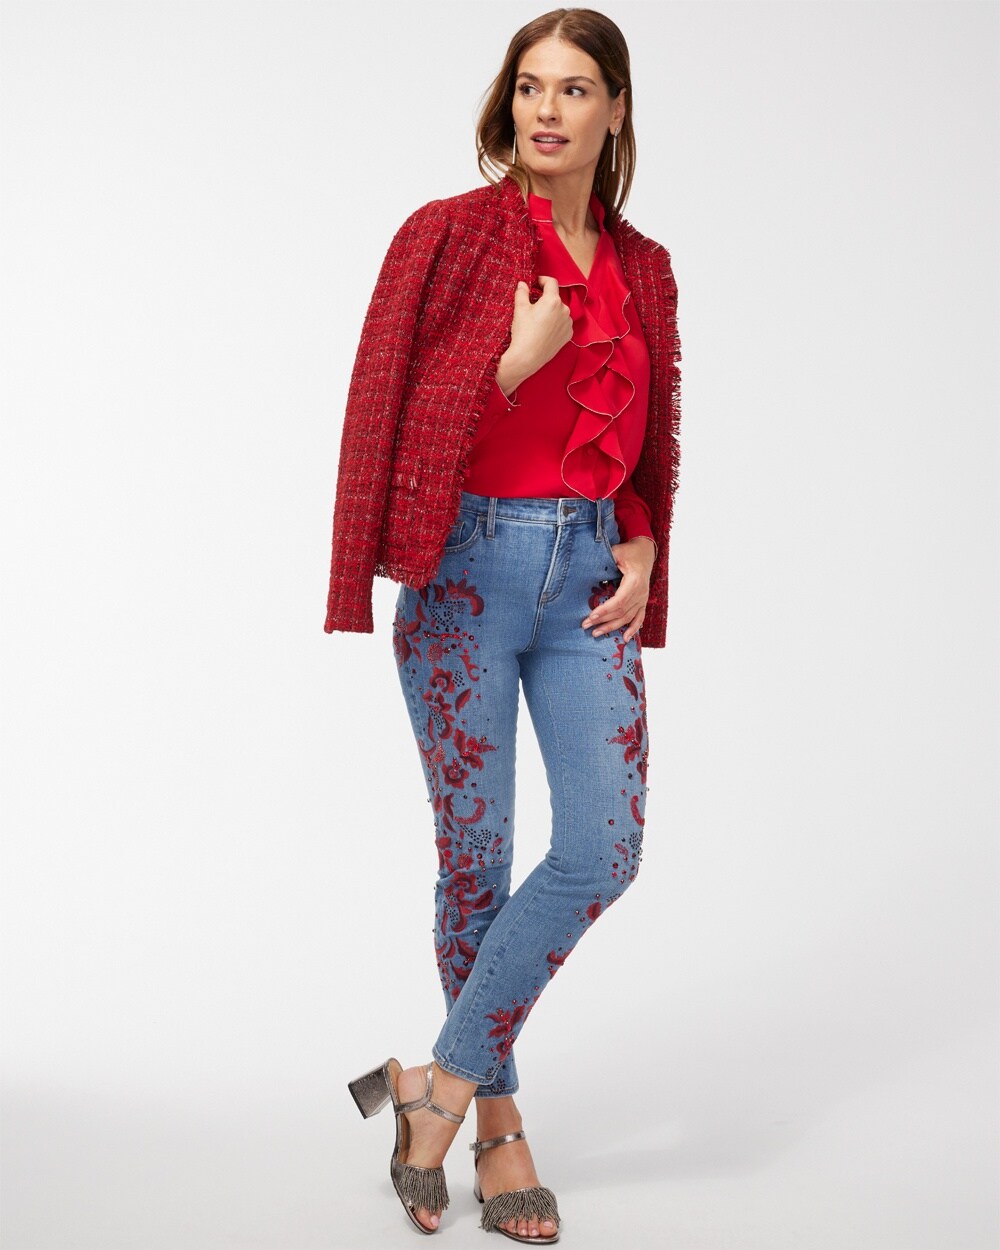 Petite Girlfriend Red Embellished Ankle Jeans